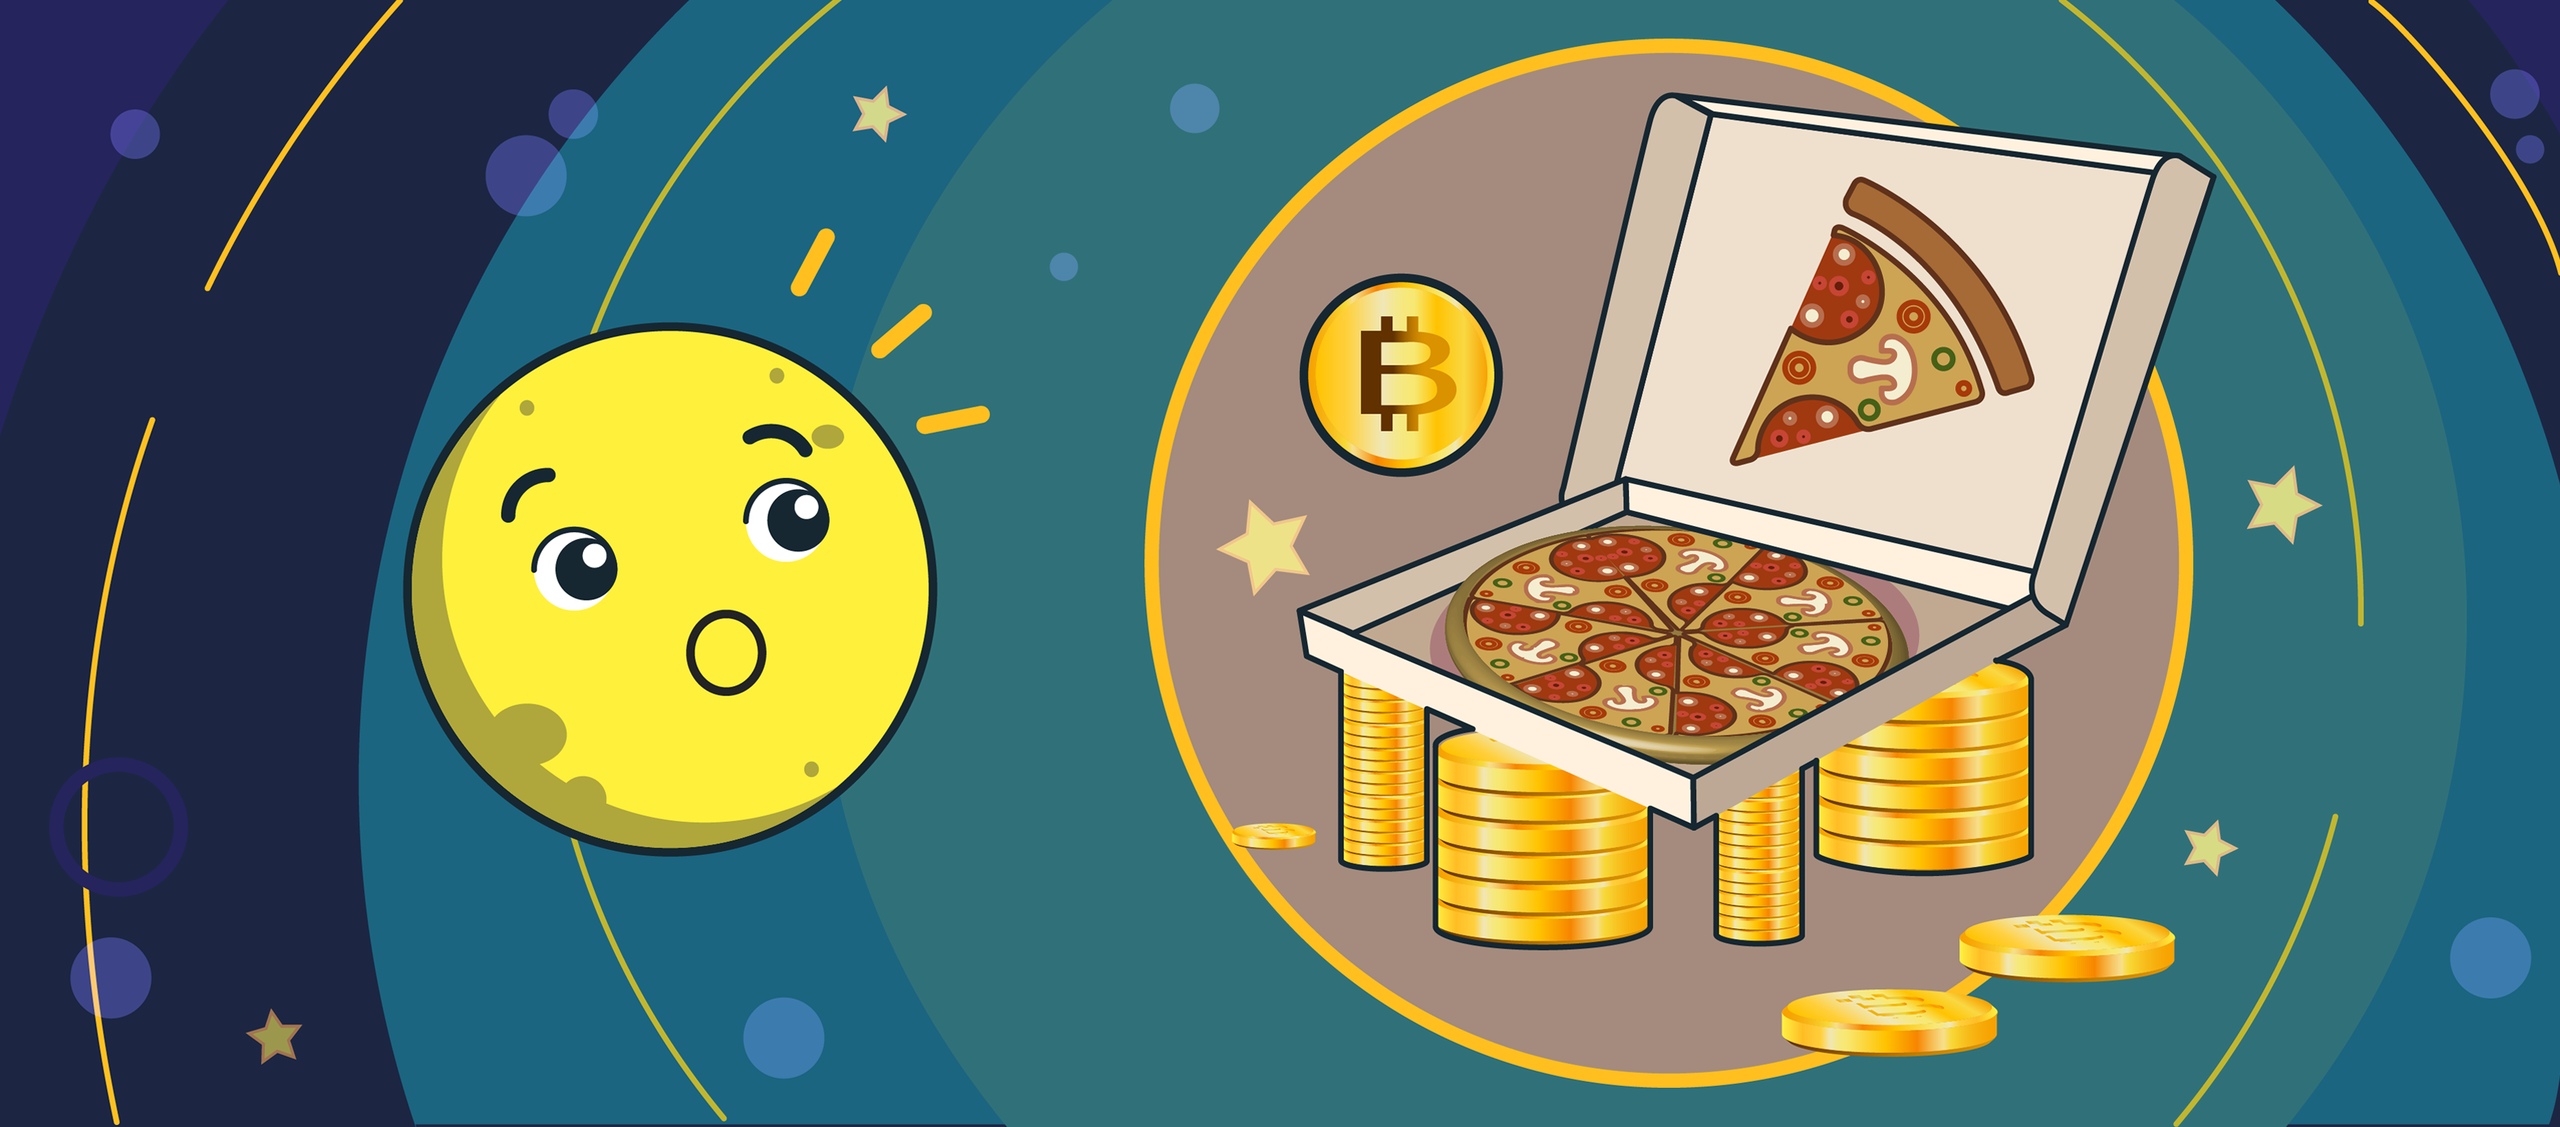 🍕 Bitcoin Pizza Day: 10 Years Anniversary of the Most Expensive Fast Food Purchase Ever Made 🍕